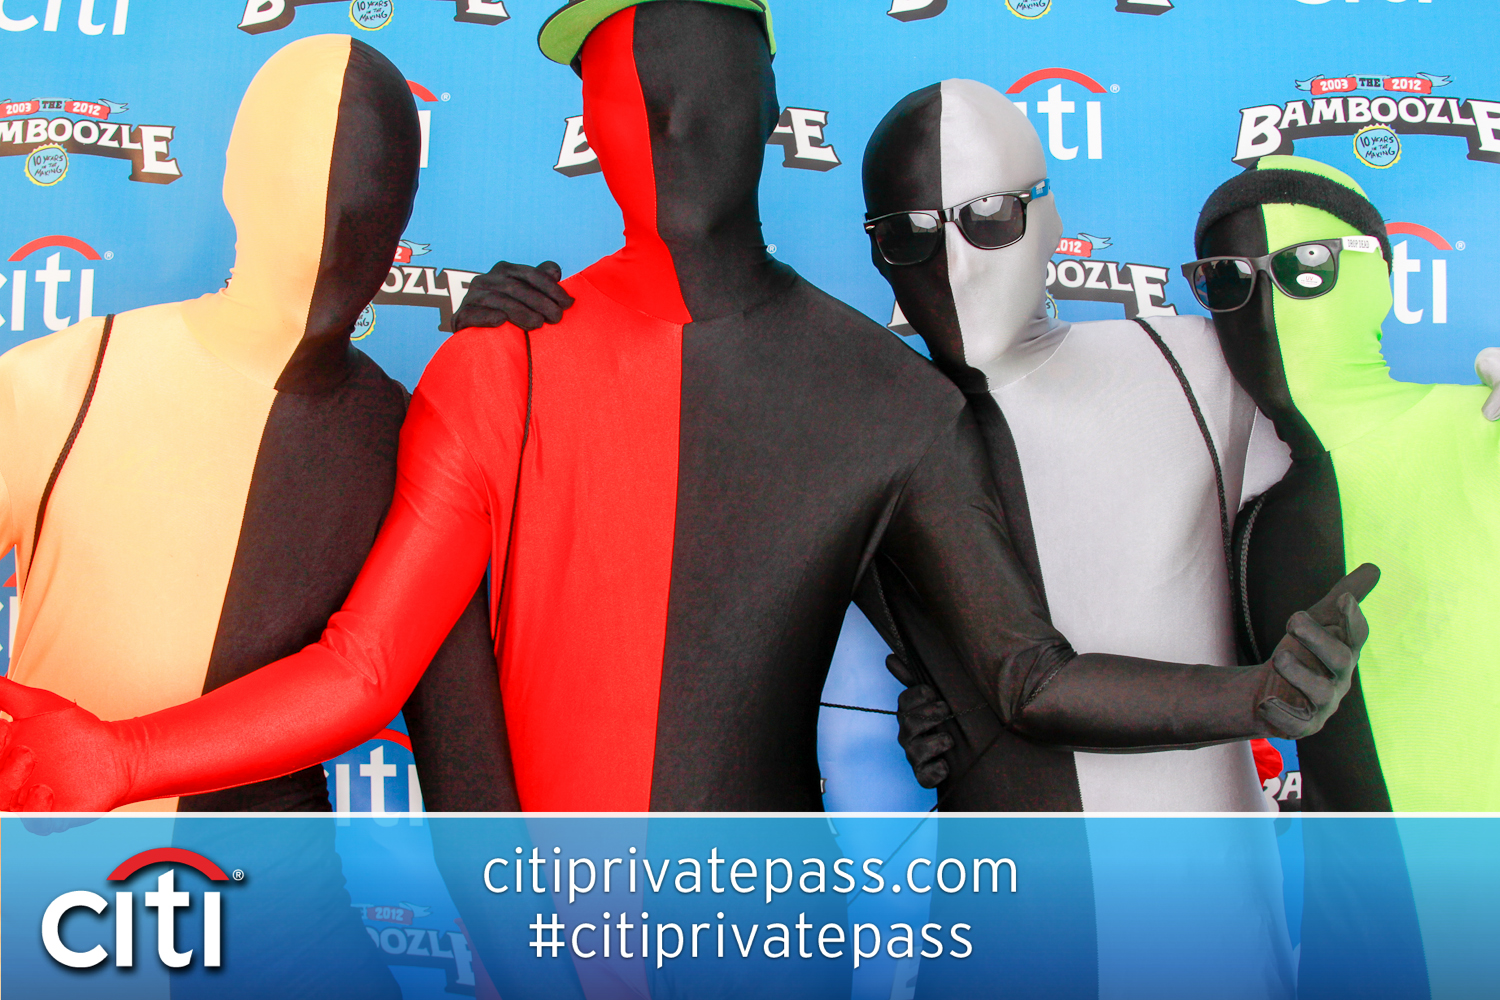 Citi Private Pass Photo Booth at Bamboozle at Asbury Park, New Jersey on May 20, 2012